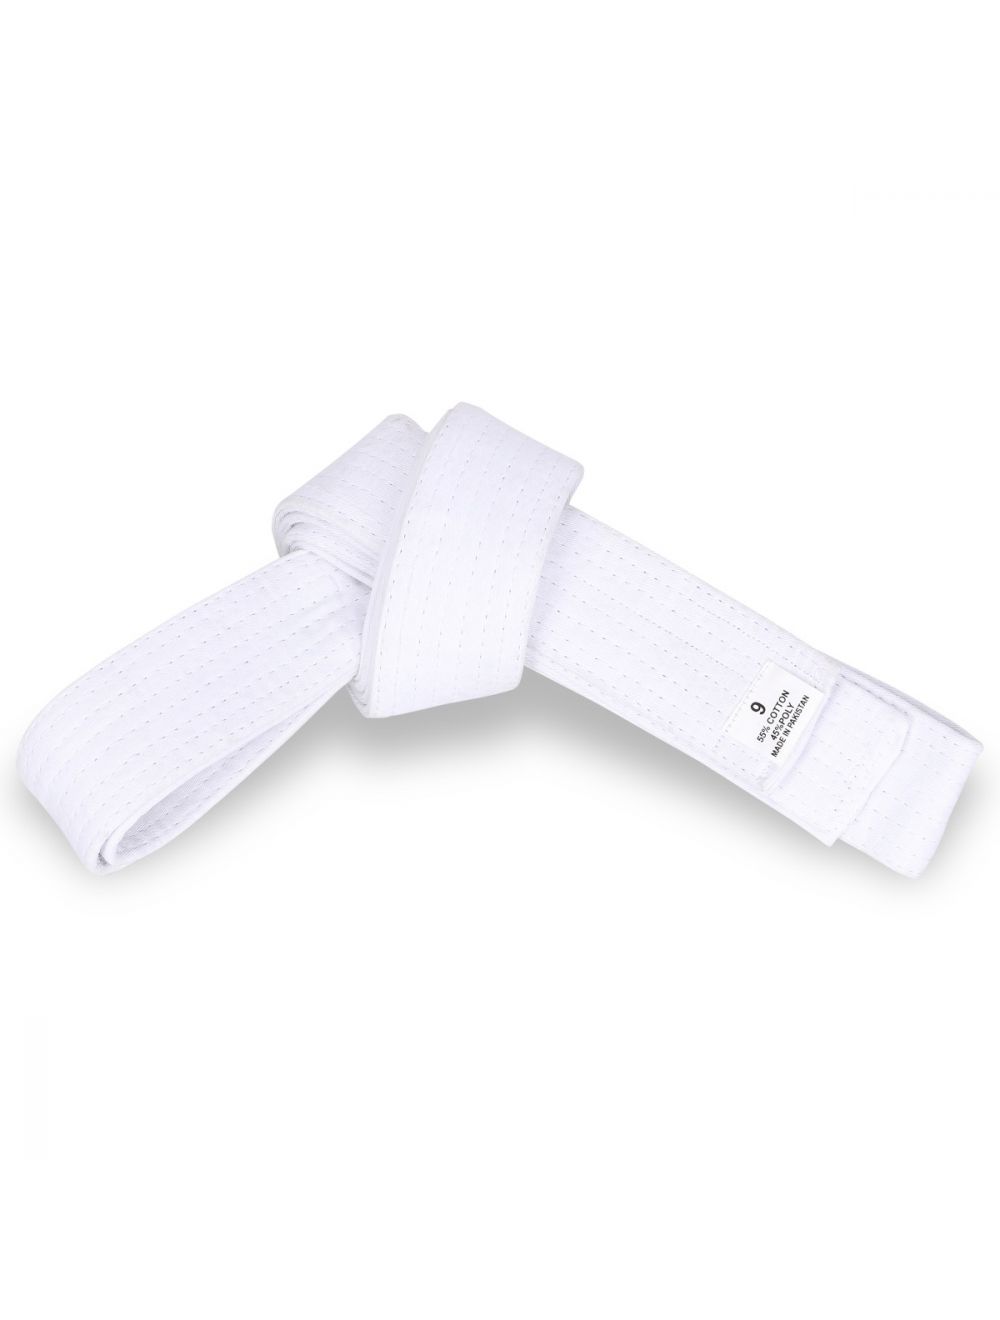 Solid Karate Belts with 9 Rows of Stitching, Ideal for Traditional Karate, MMA, Judo, Taekwondo